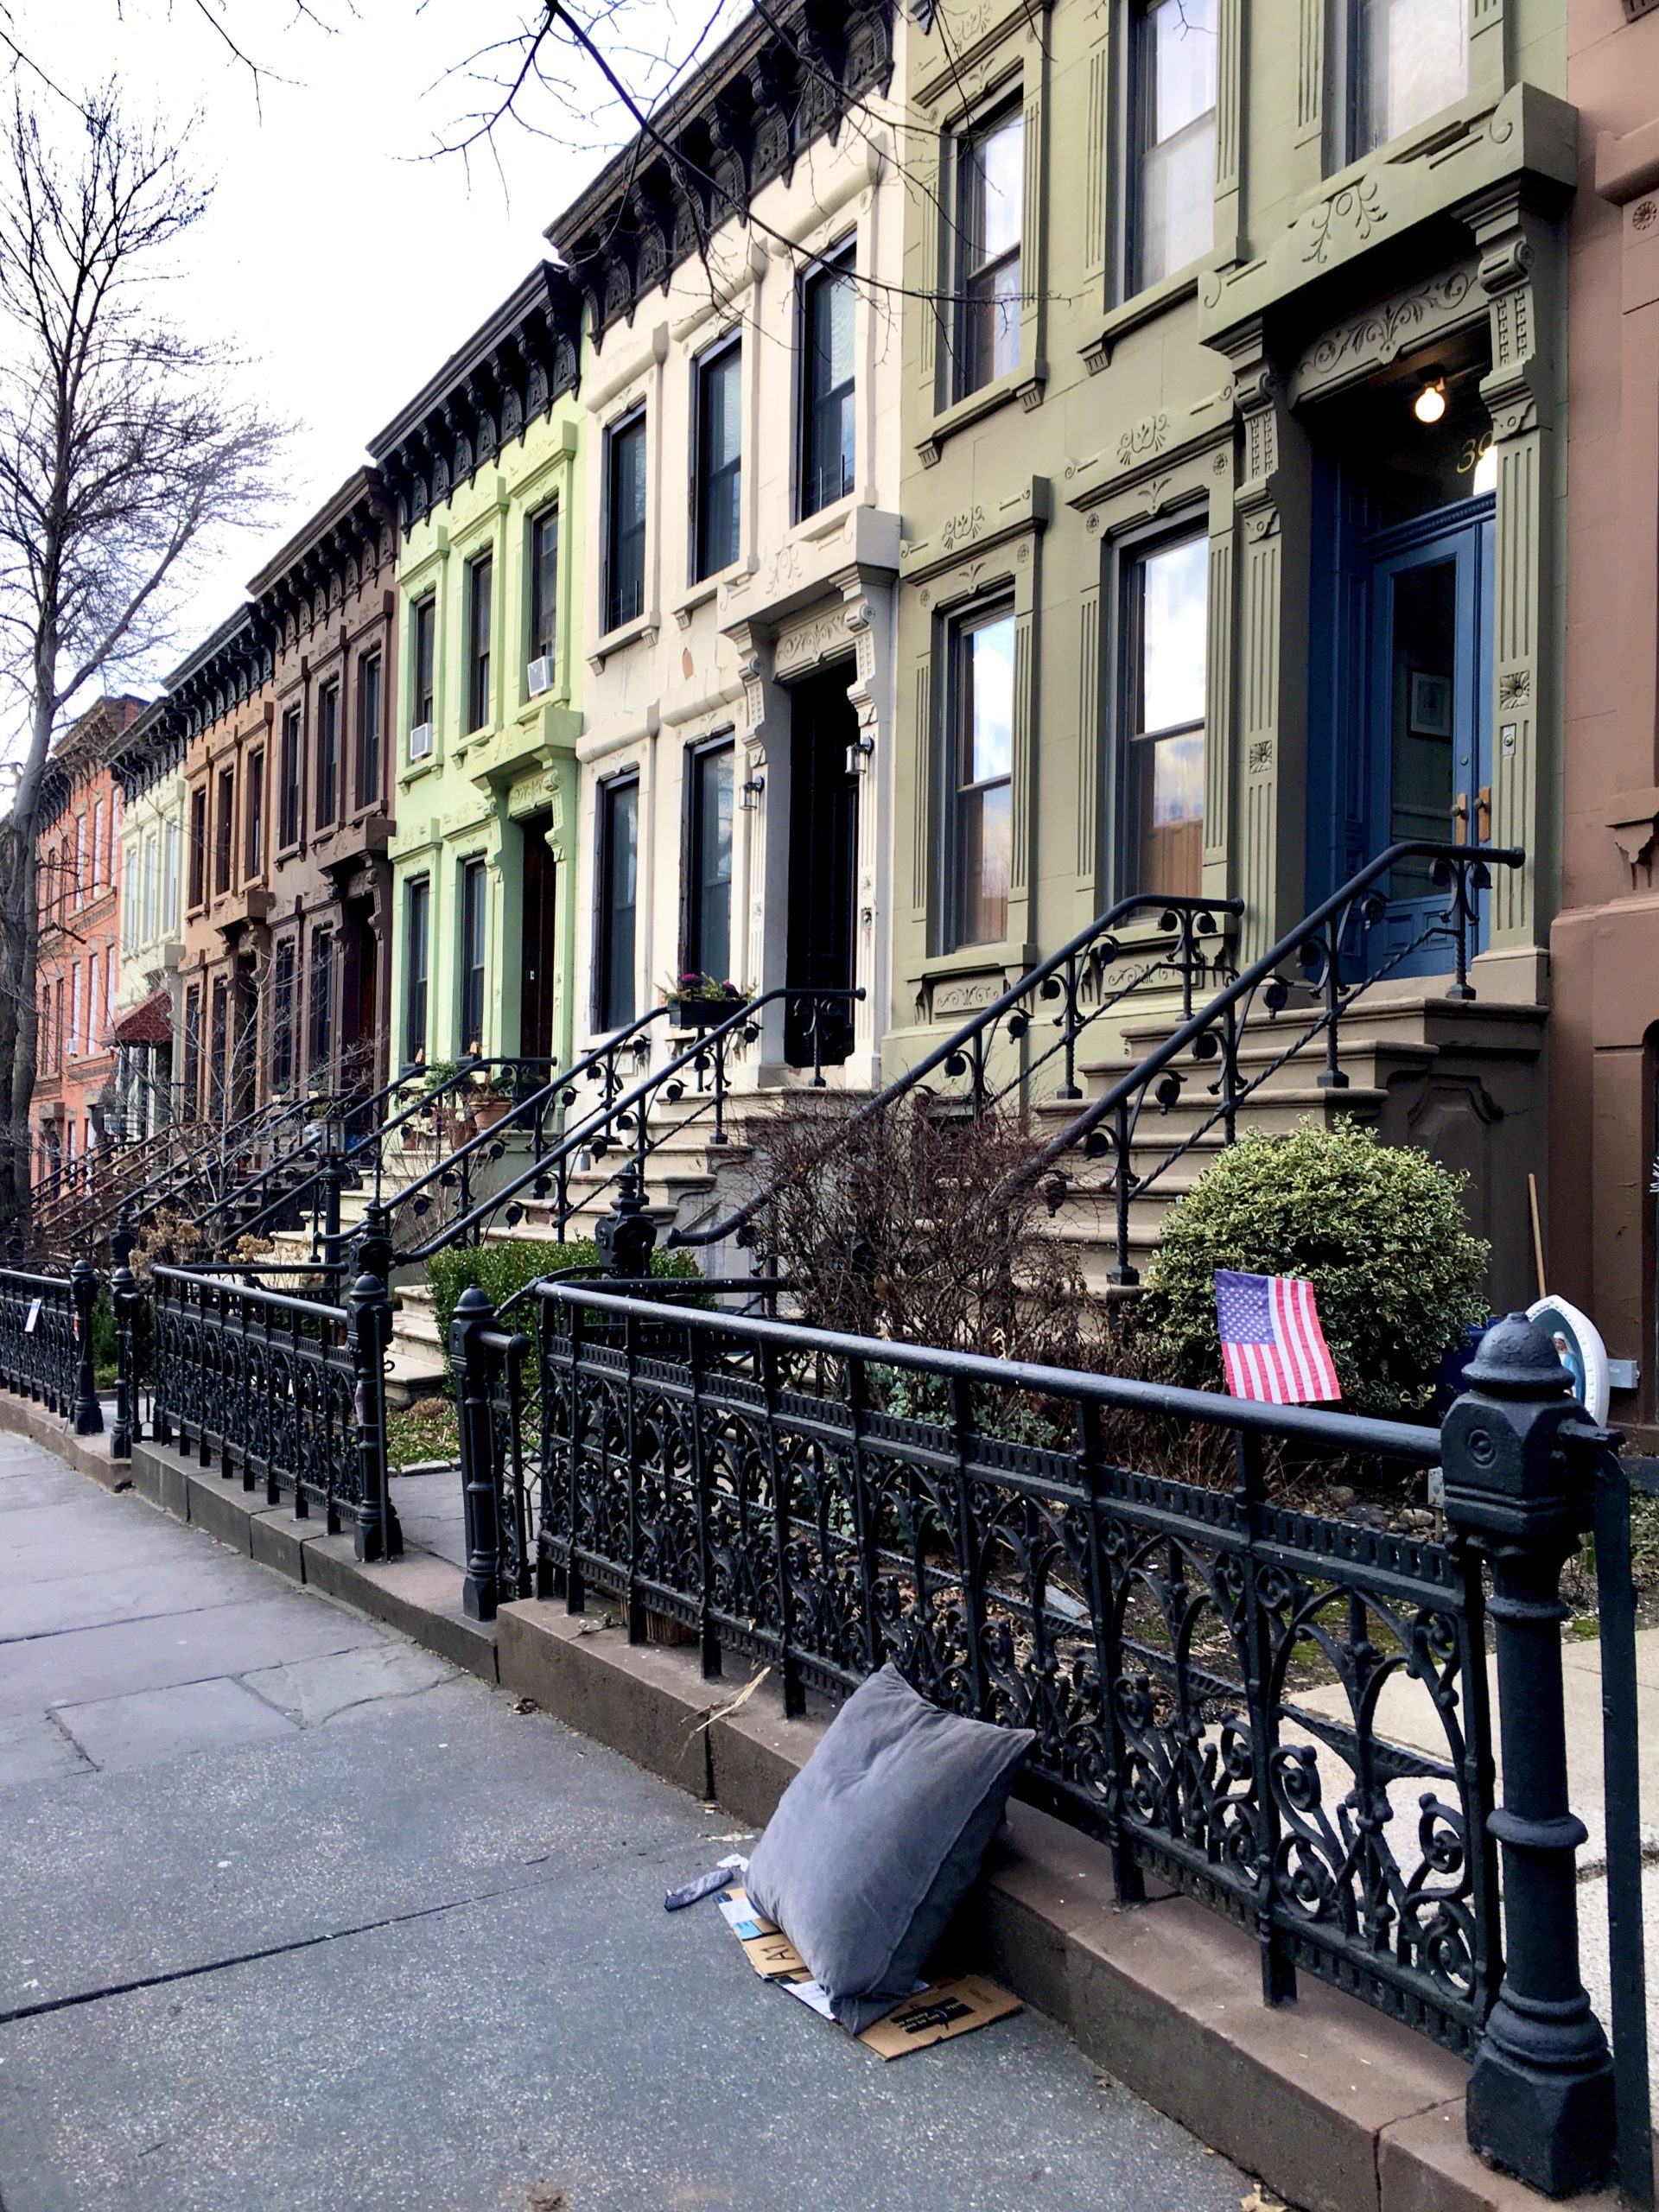 Homes on 7th Street are ice cream-colored. Photo: Lore Croghan/Brooklyn Eagle